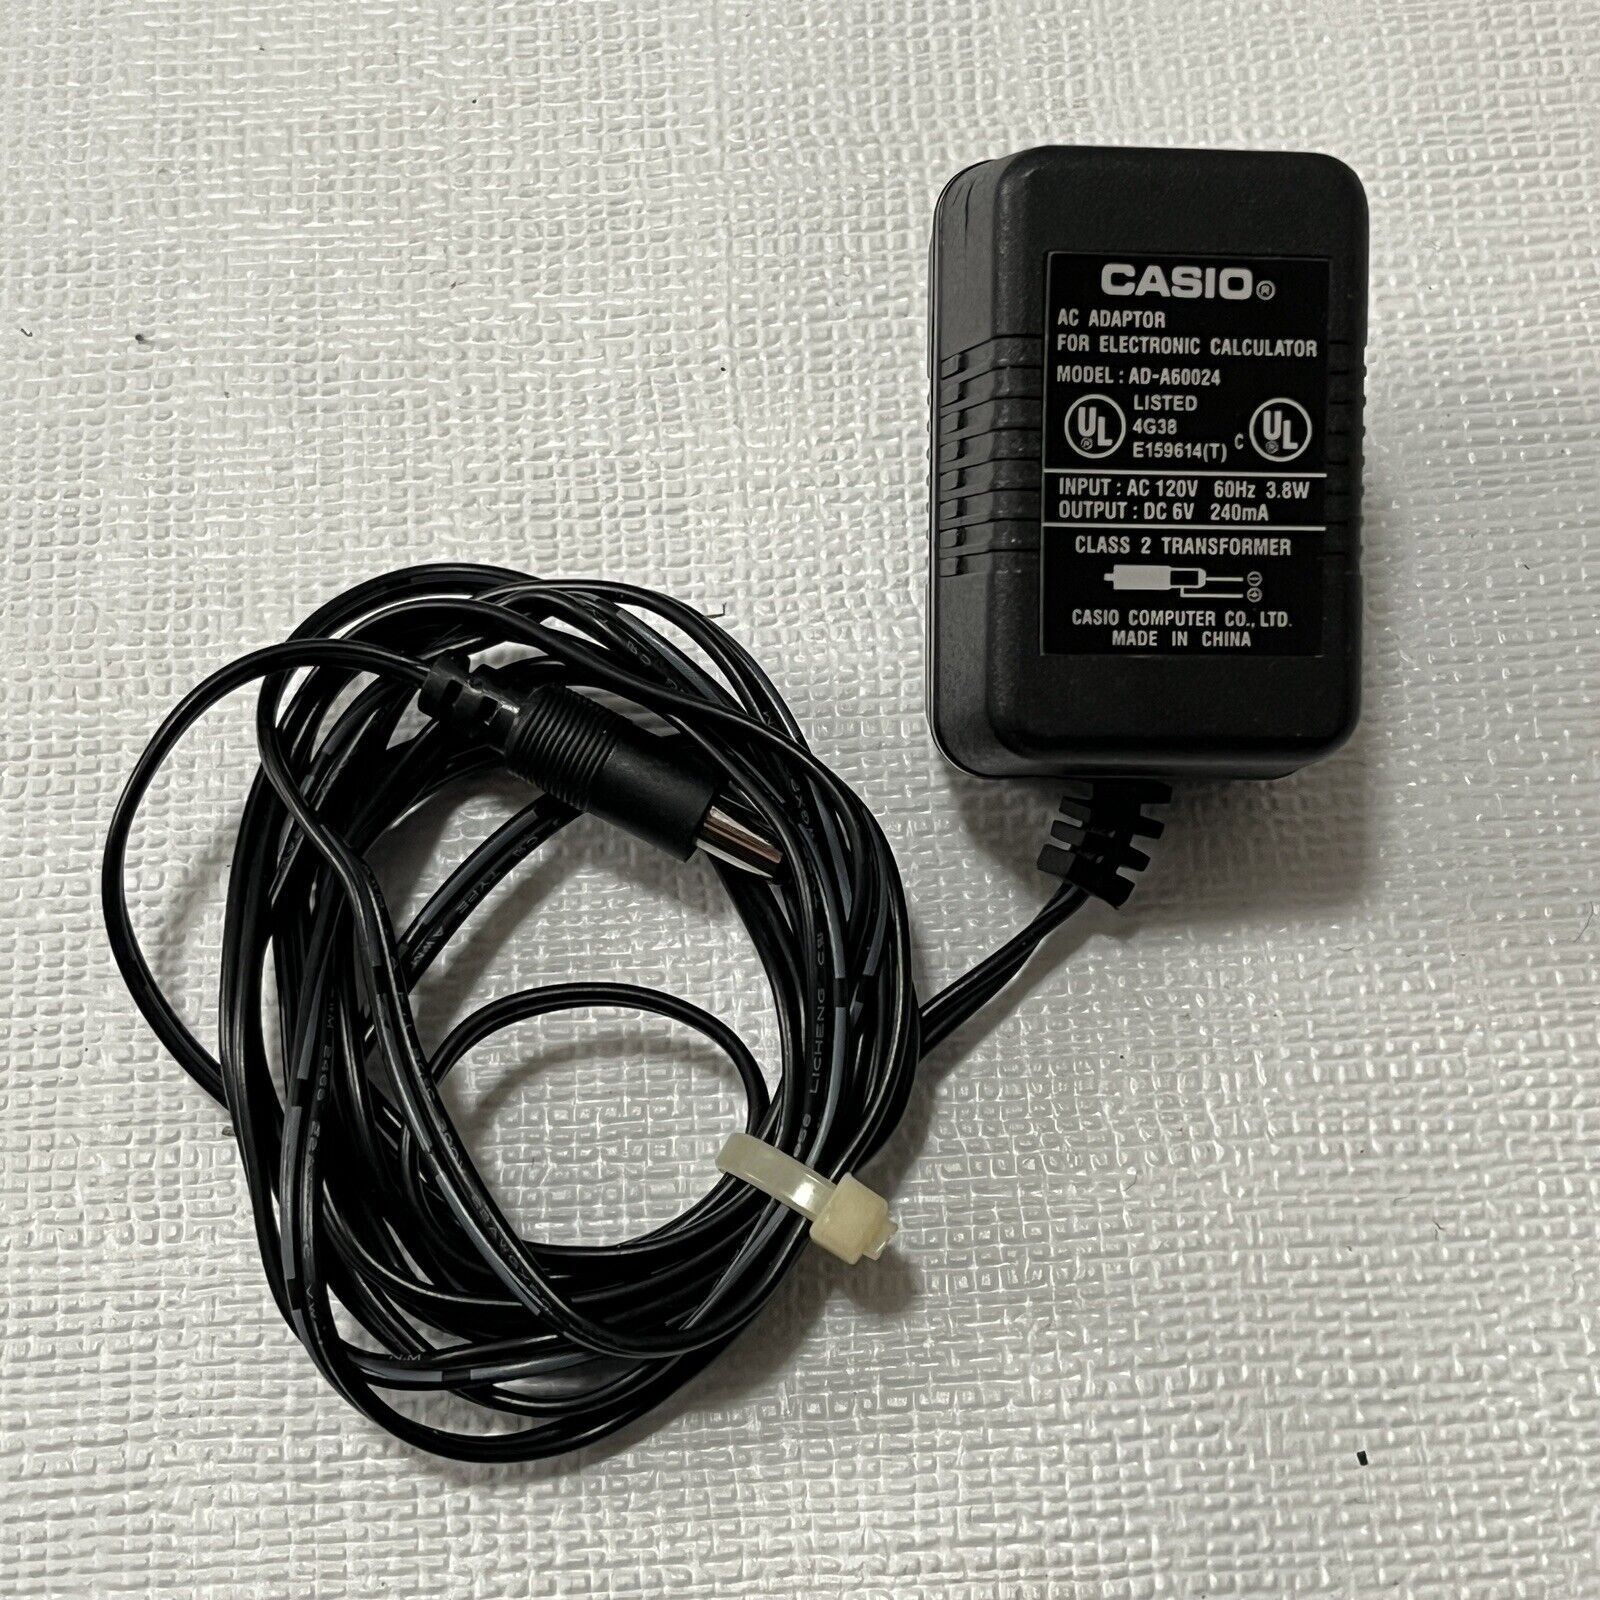 *Brand NEW*Casio 6V 240mA AC Adapter For Electronic Calculator AD-A60024 Power Supply